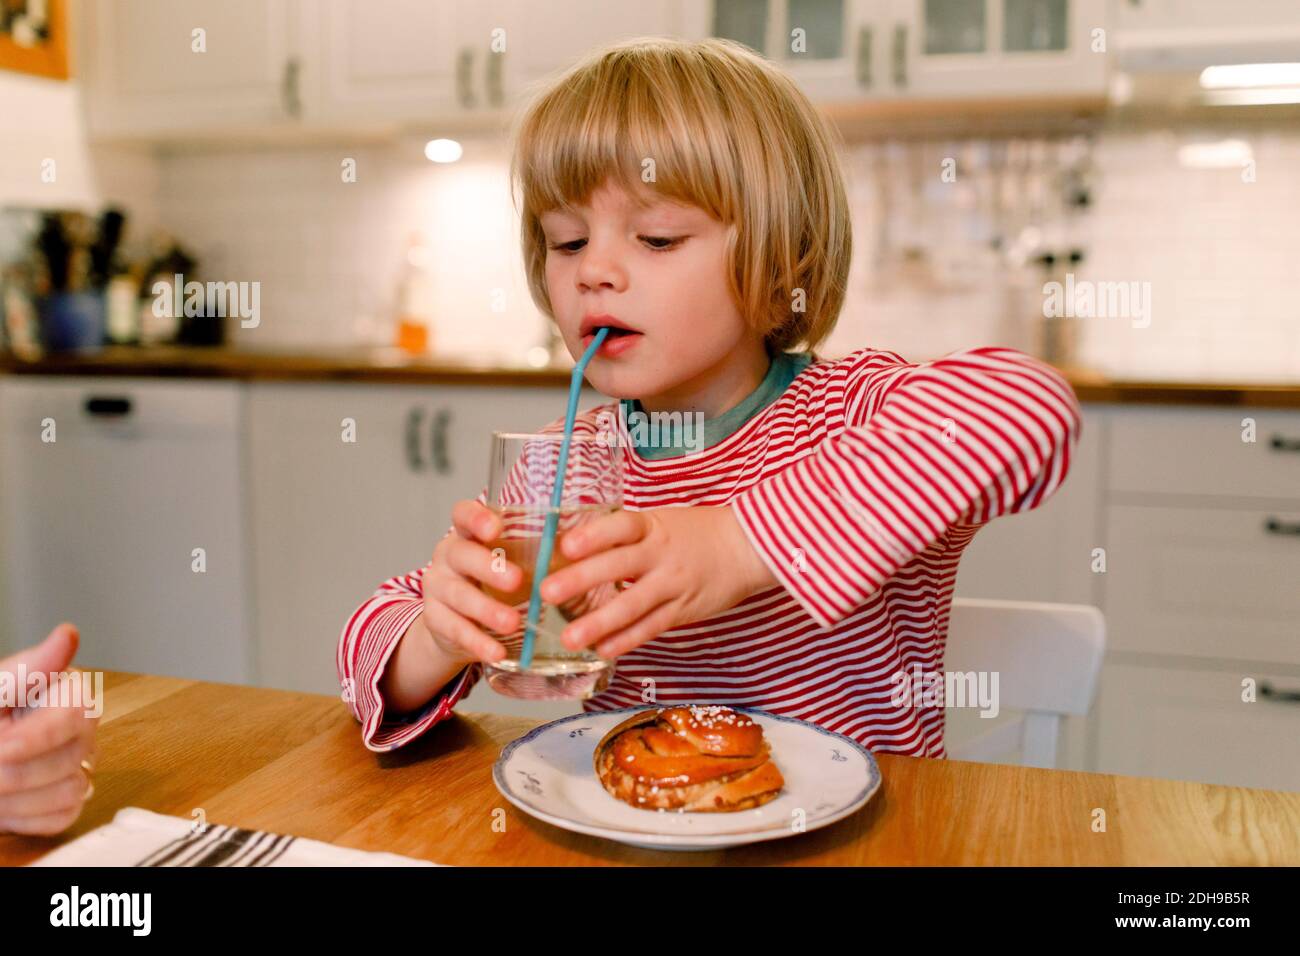 Boy having drink at dining table Stock Photo